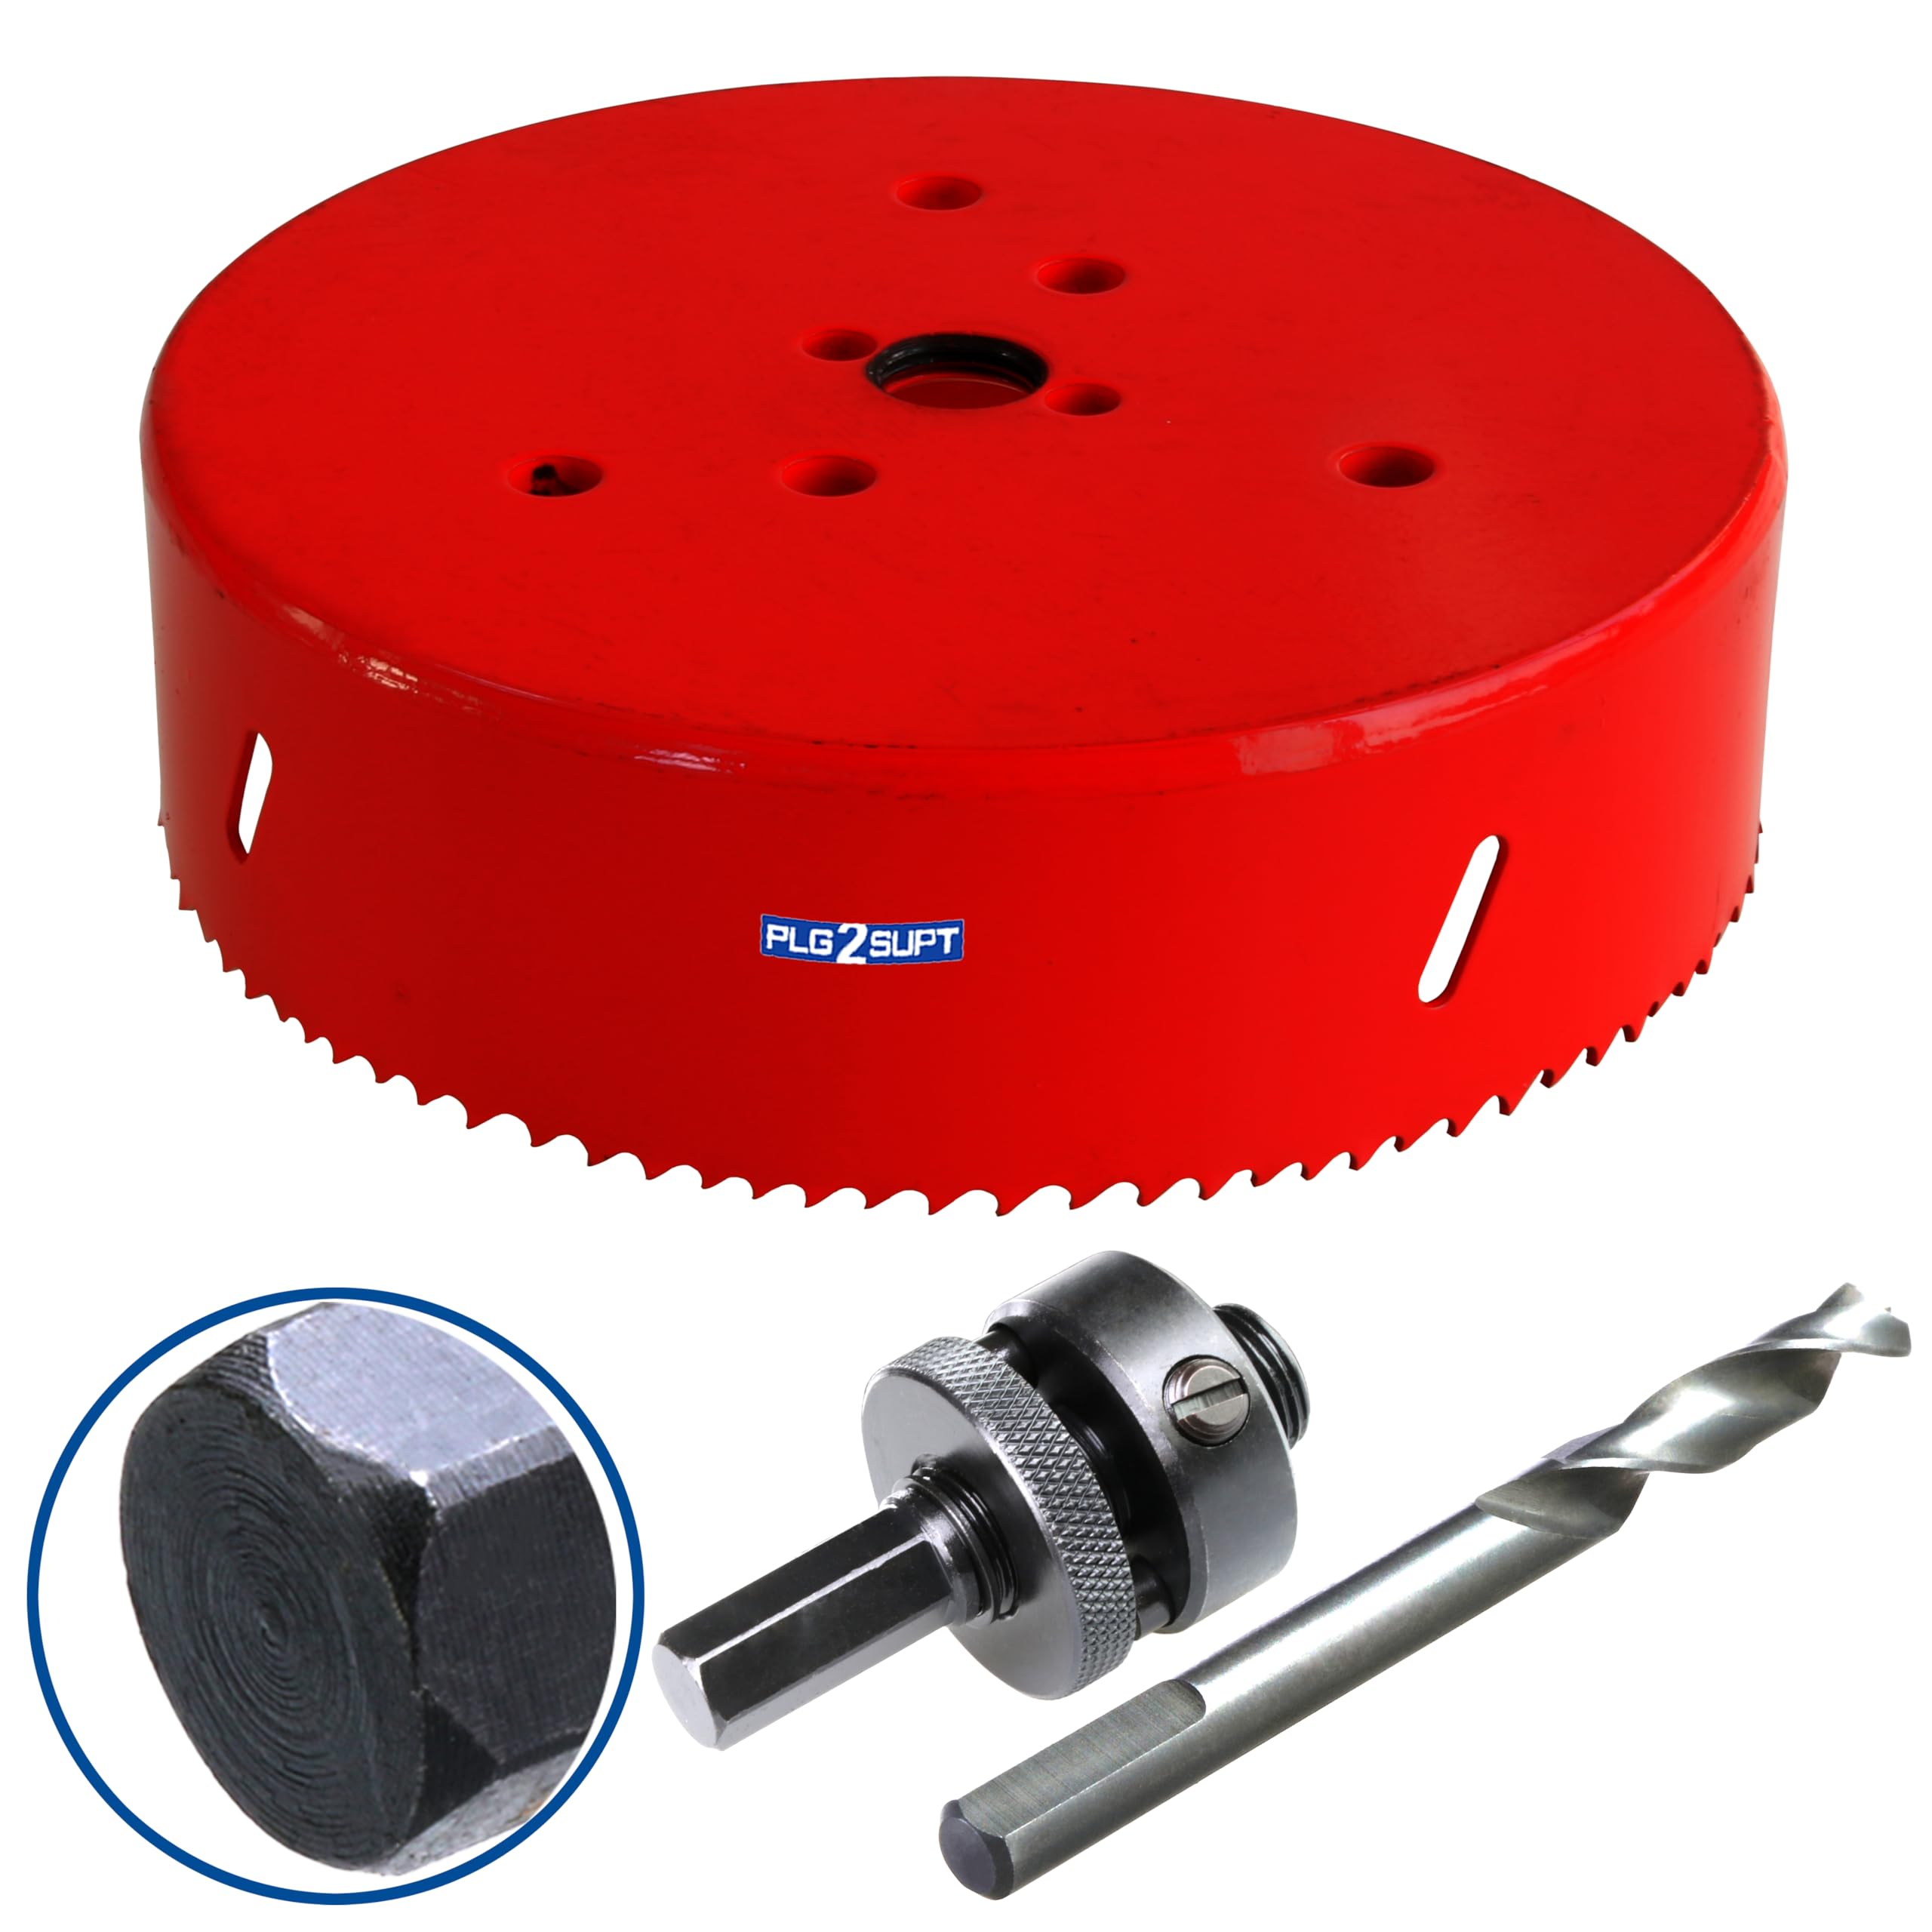 PLG2SUPT 6” HSS Bi Metal Hole Saw Cutter for Wood Drywall Plastic Aluminum Mild Steel Iron Metal Stainless Steel Heavy Duty Hole Saw Bit with Arbor